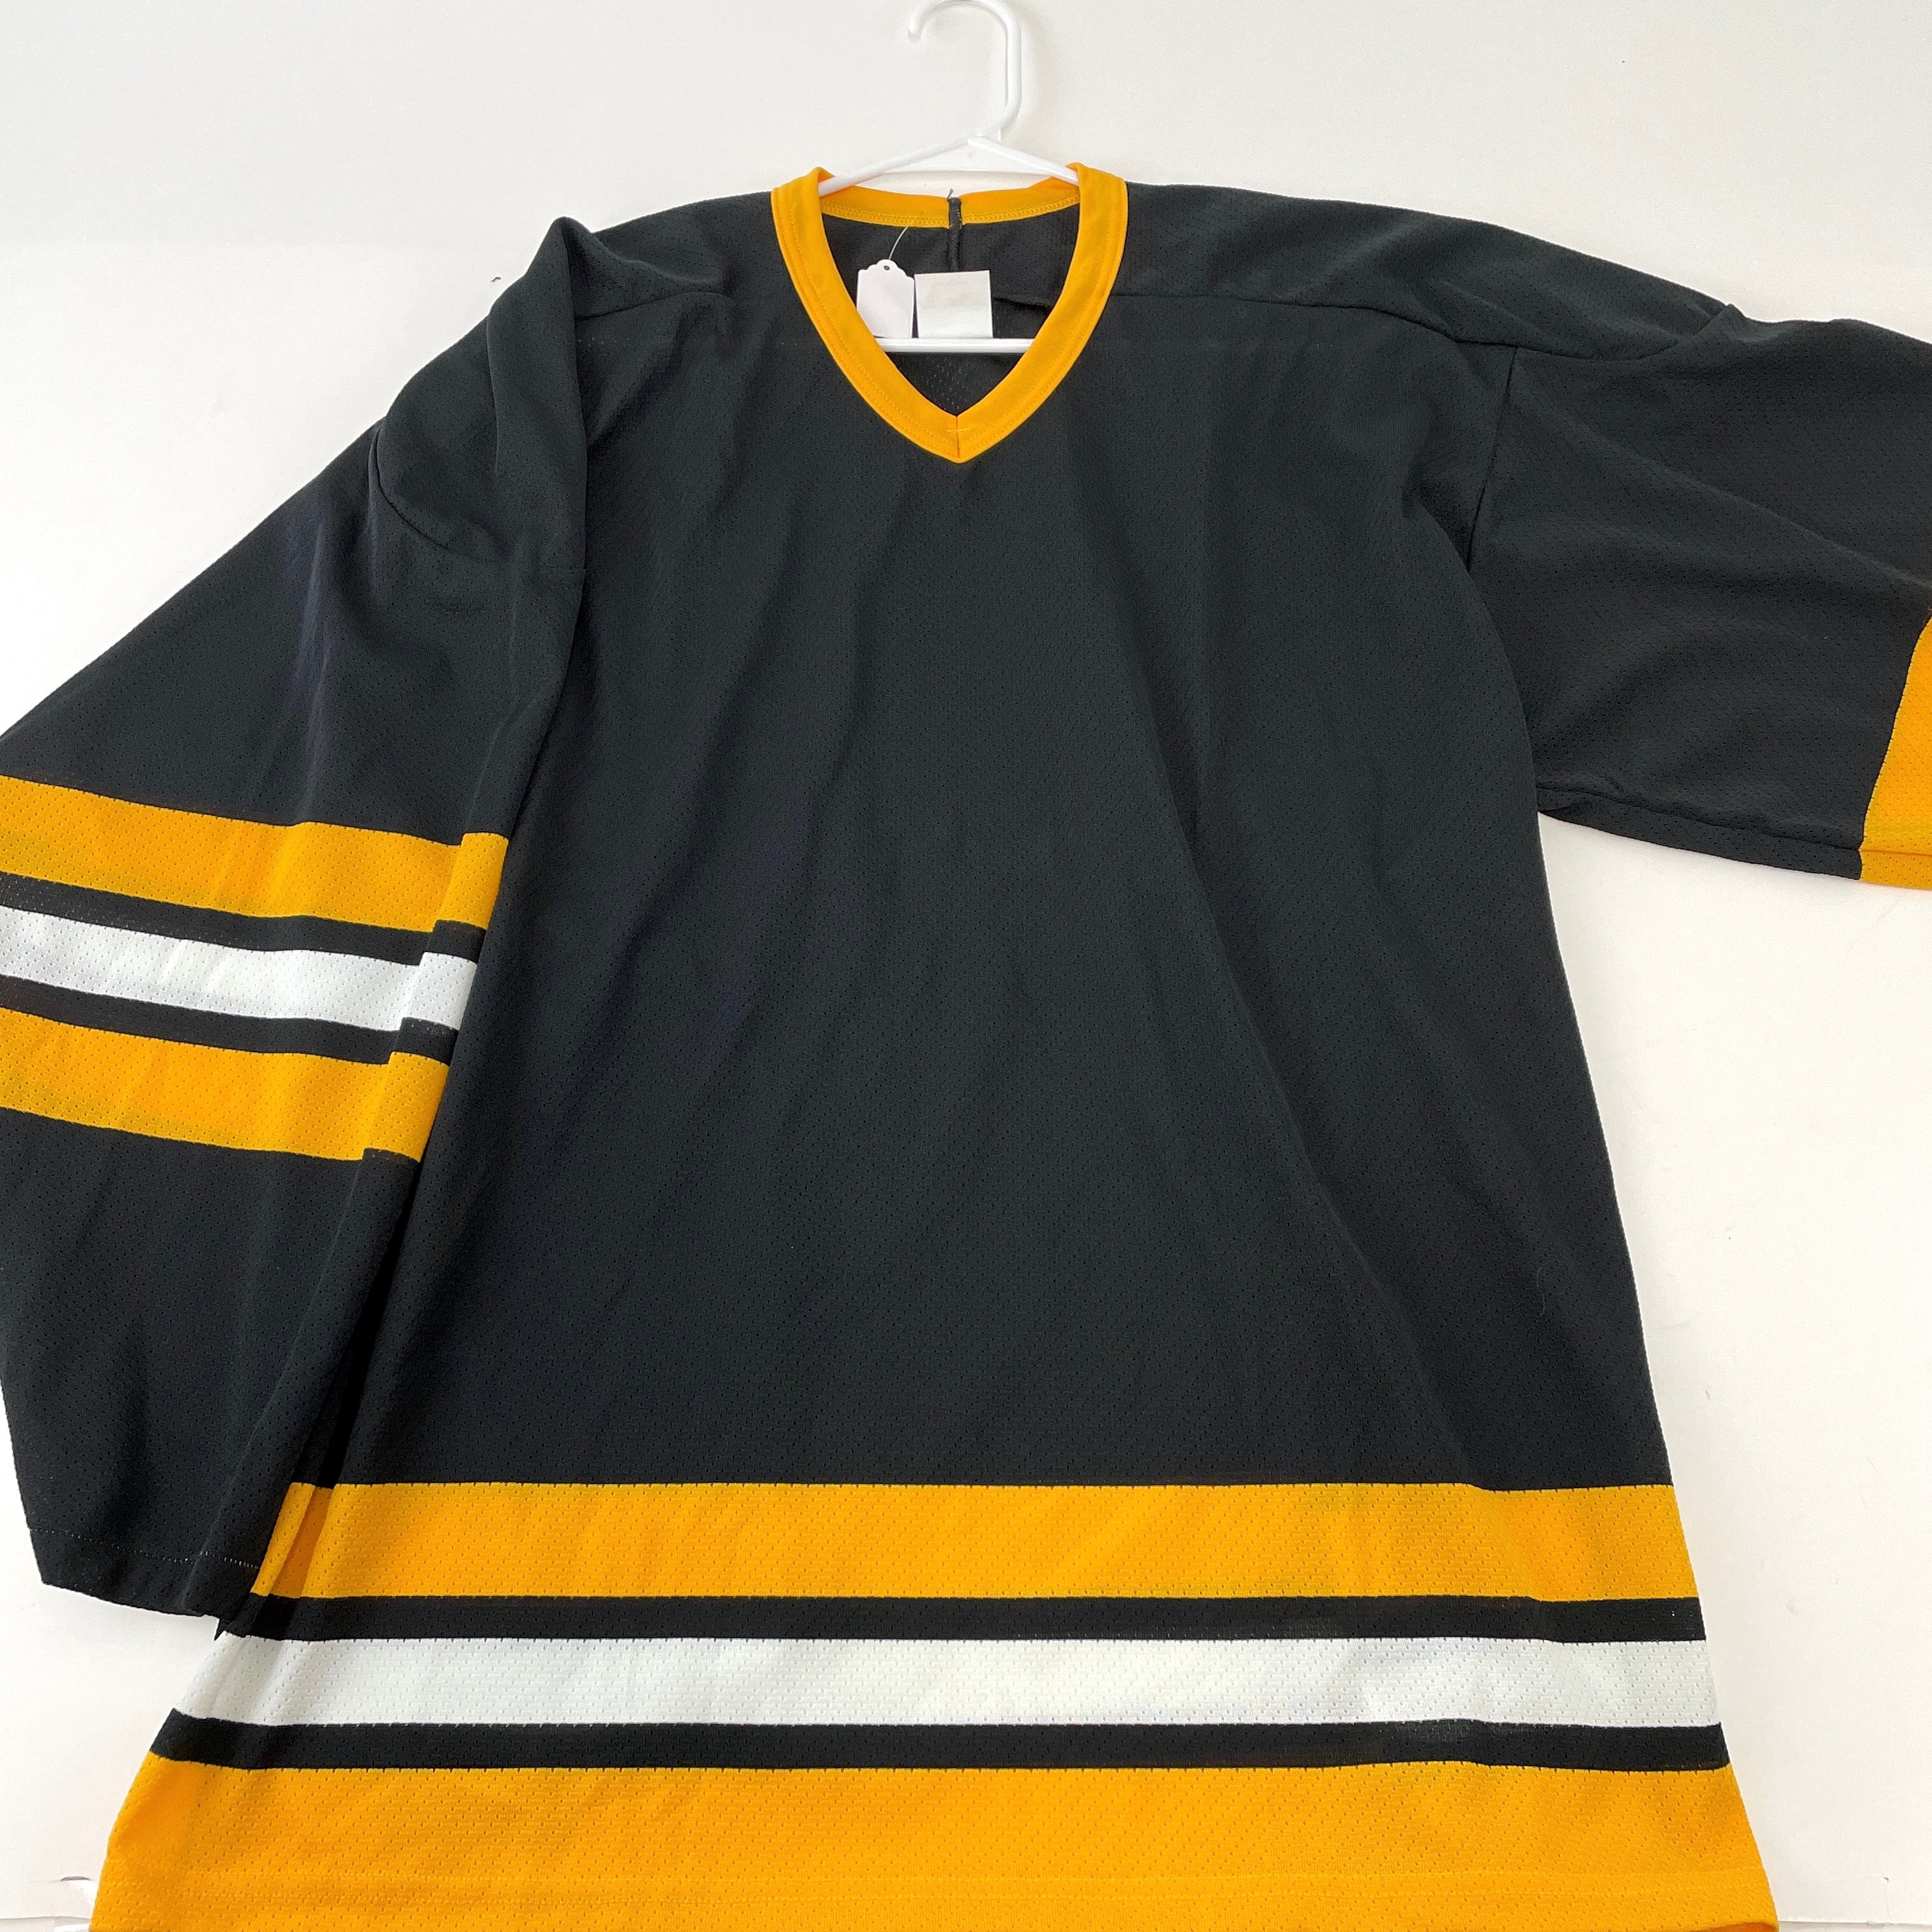 VINTAGE MADE IN CANADA BOSTON BRUINS THE POOH BEAR YOUTH HOCKEY JERSEY SIZE  L/XL